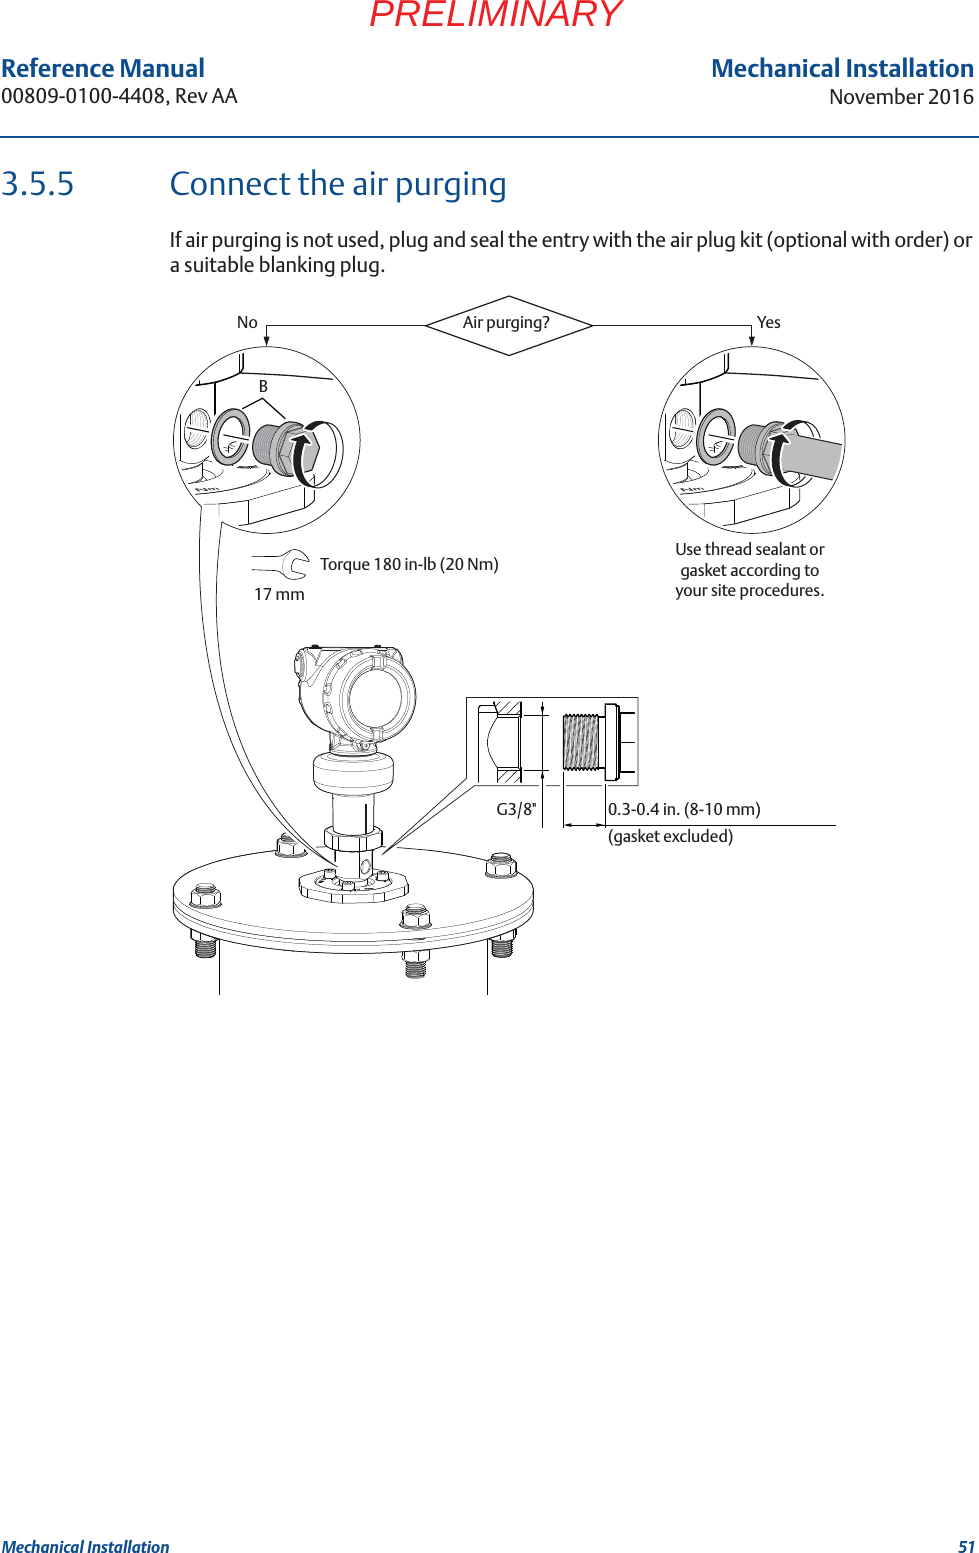 51Reference Manual 00809-0100-4408, Rev AAMechanical InstallationNovember 2016Mechanical InstallationPRELIMINARY3.5.5 Connect the air purgingIf air purging is not used, plug and seal the entry with the air plug kit (optional with order) or a suitable blanking plug.G3/8&quot;Air purging?No Yes0.3-0.4 in. (8-10 mm)(gasket excluded)Use thread sealant or gasket according to your site procedures.BTorque 180 in-lb (20 Nm) 17 mm